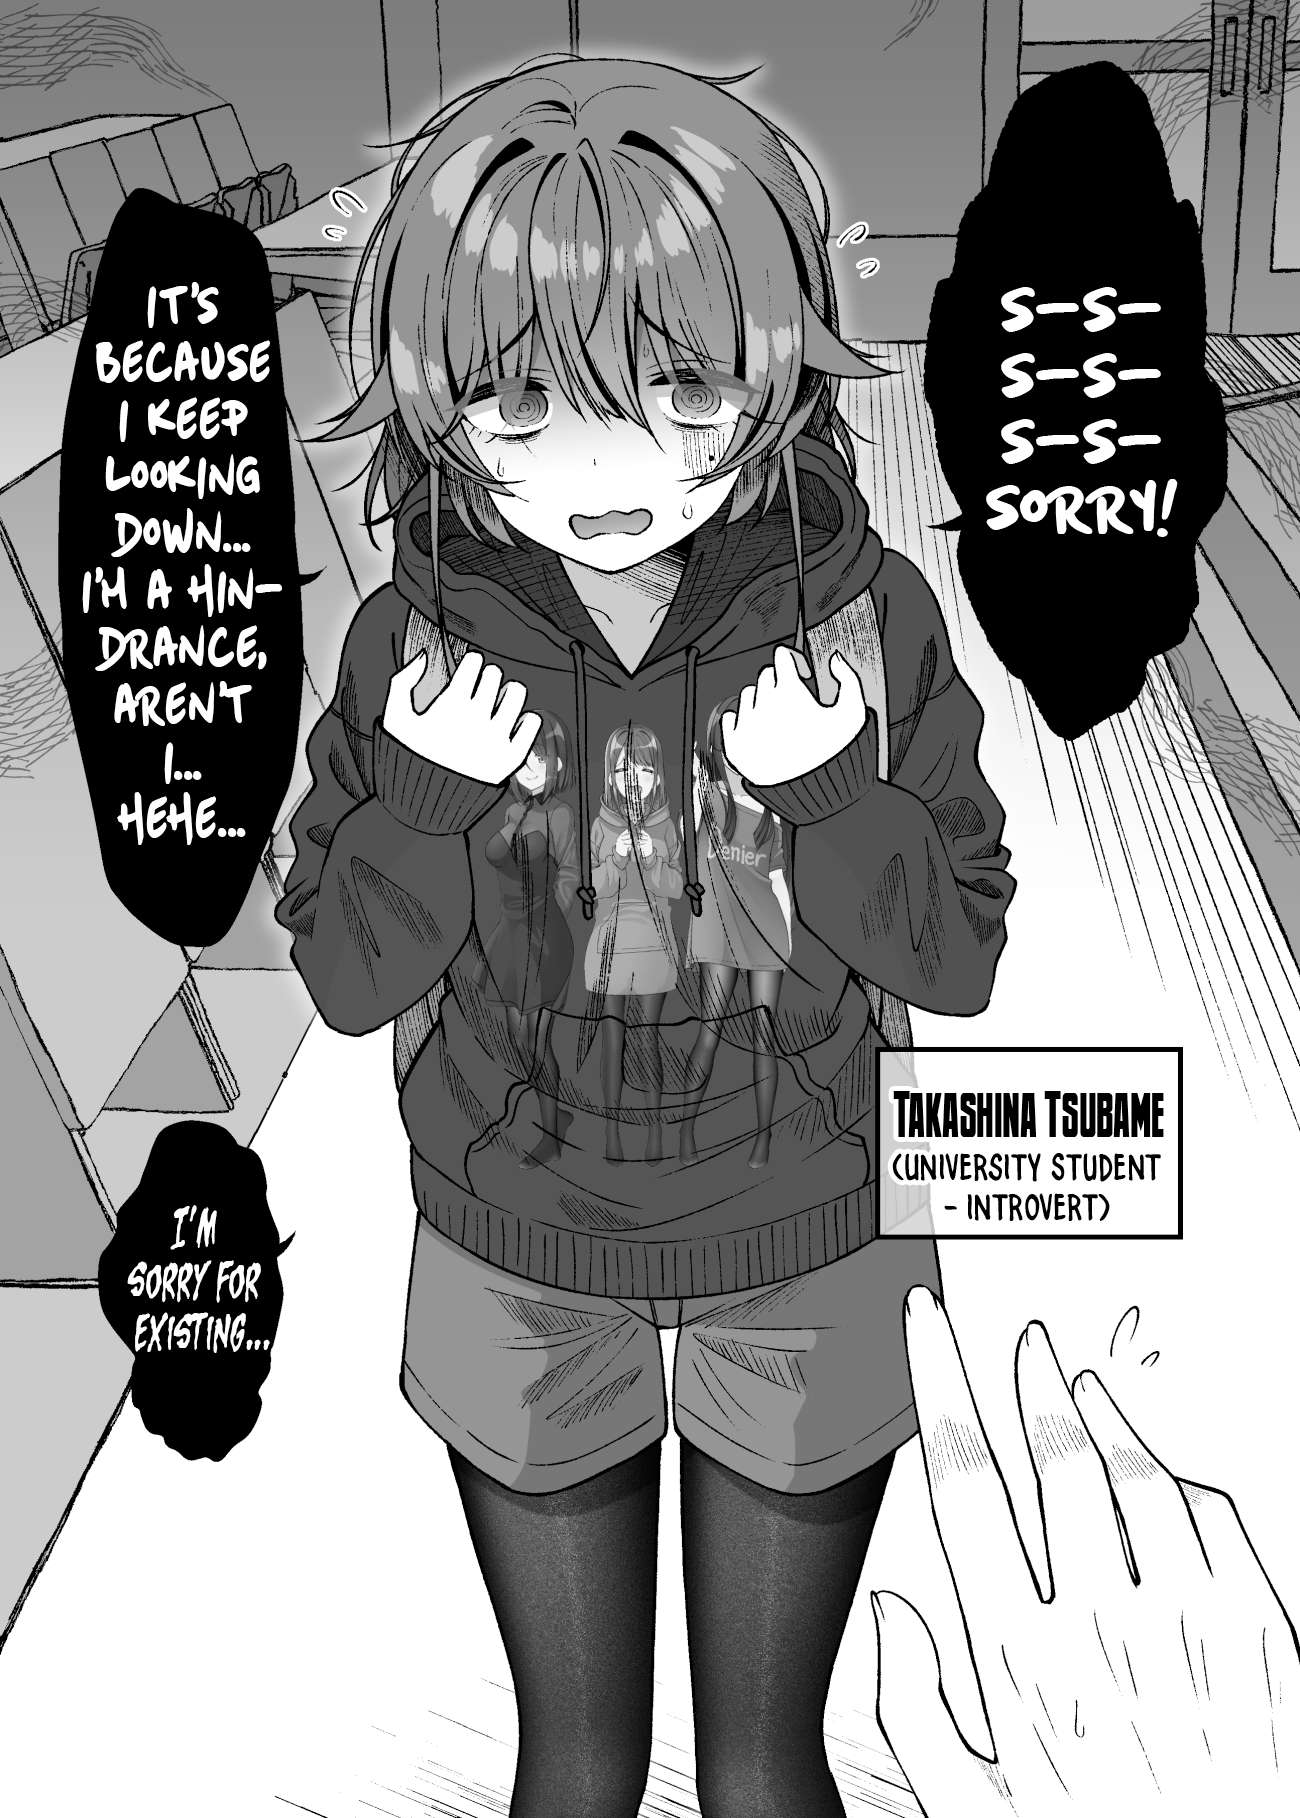 Introvert Tsubame Wants To Change - chapter 1 - #1